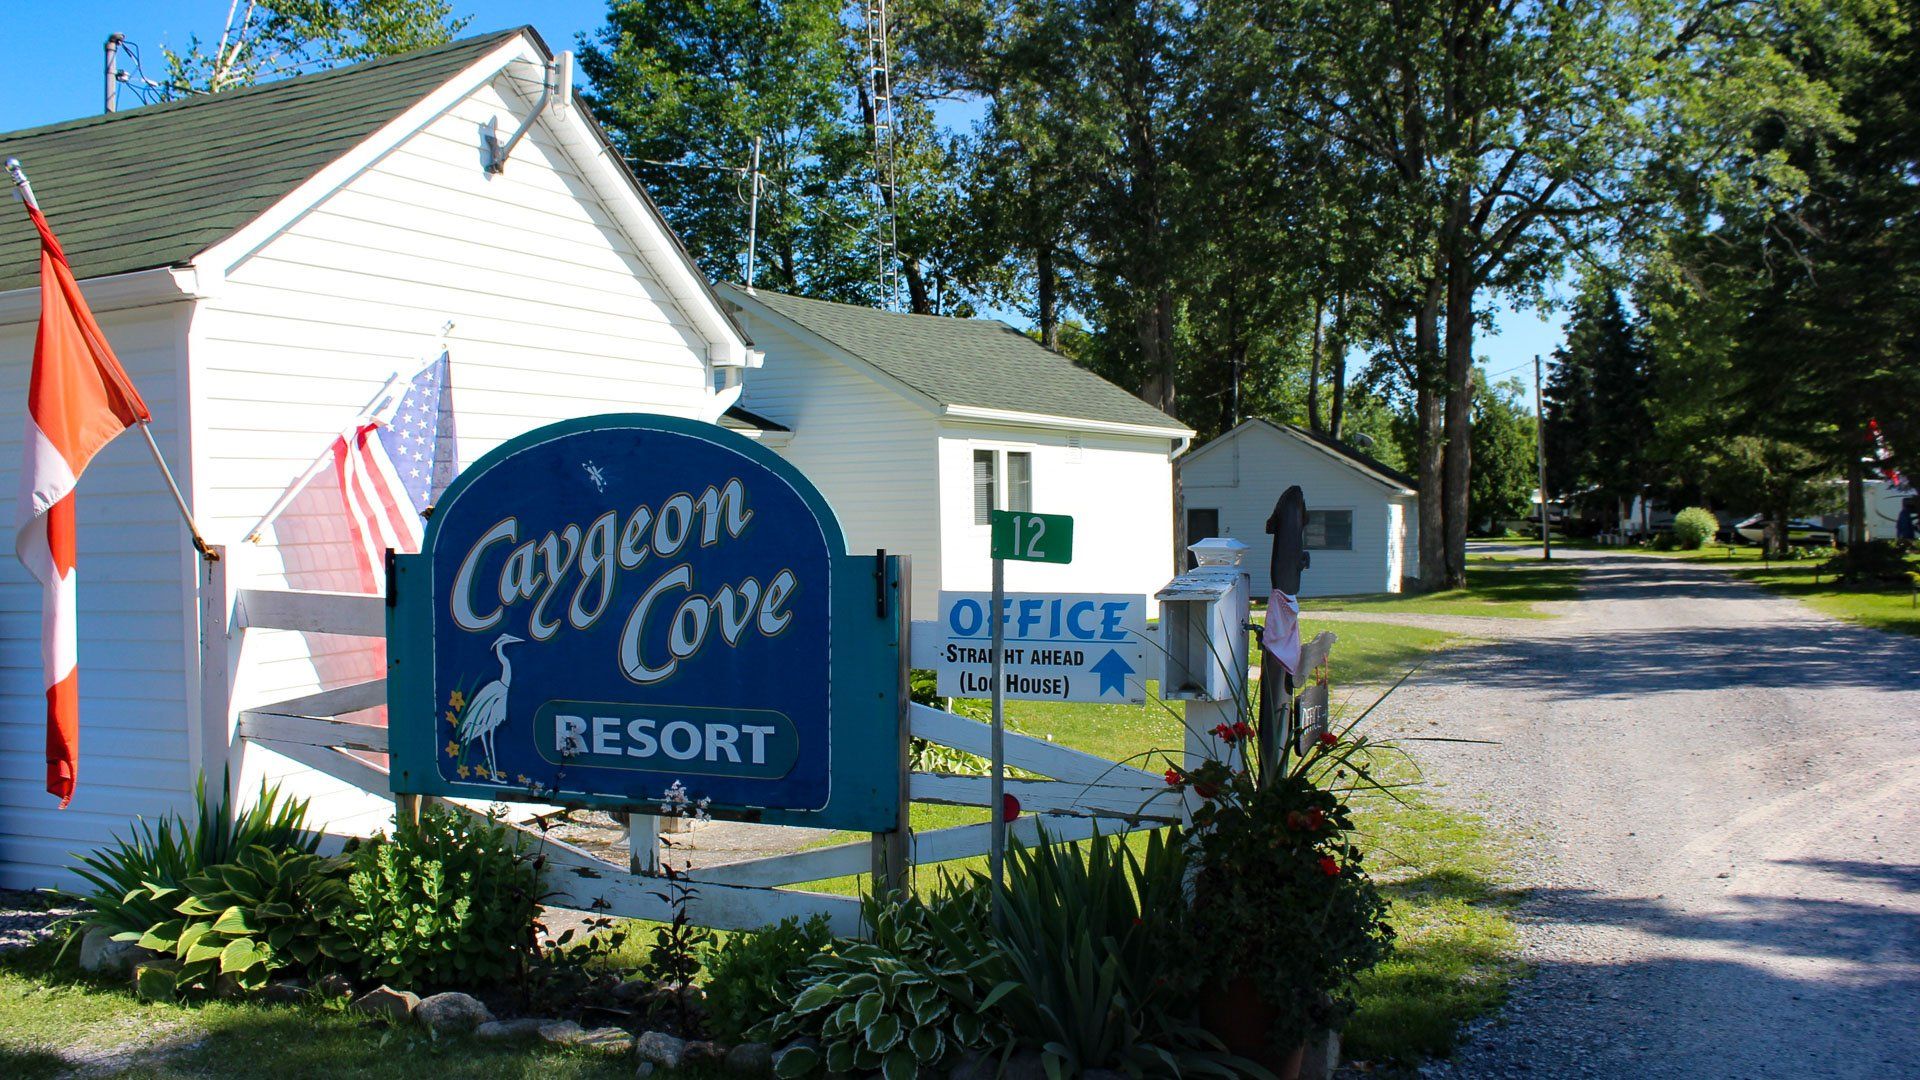 A sign for caryson cove resort is in front of a white building